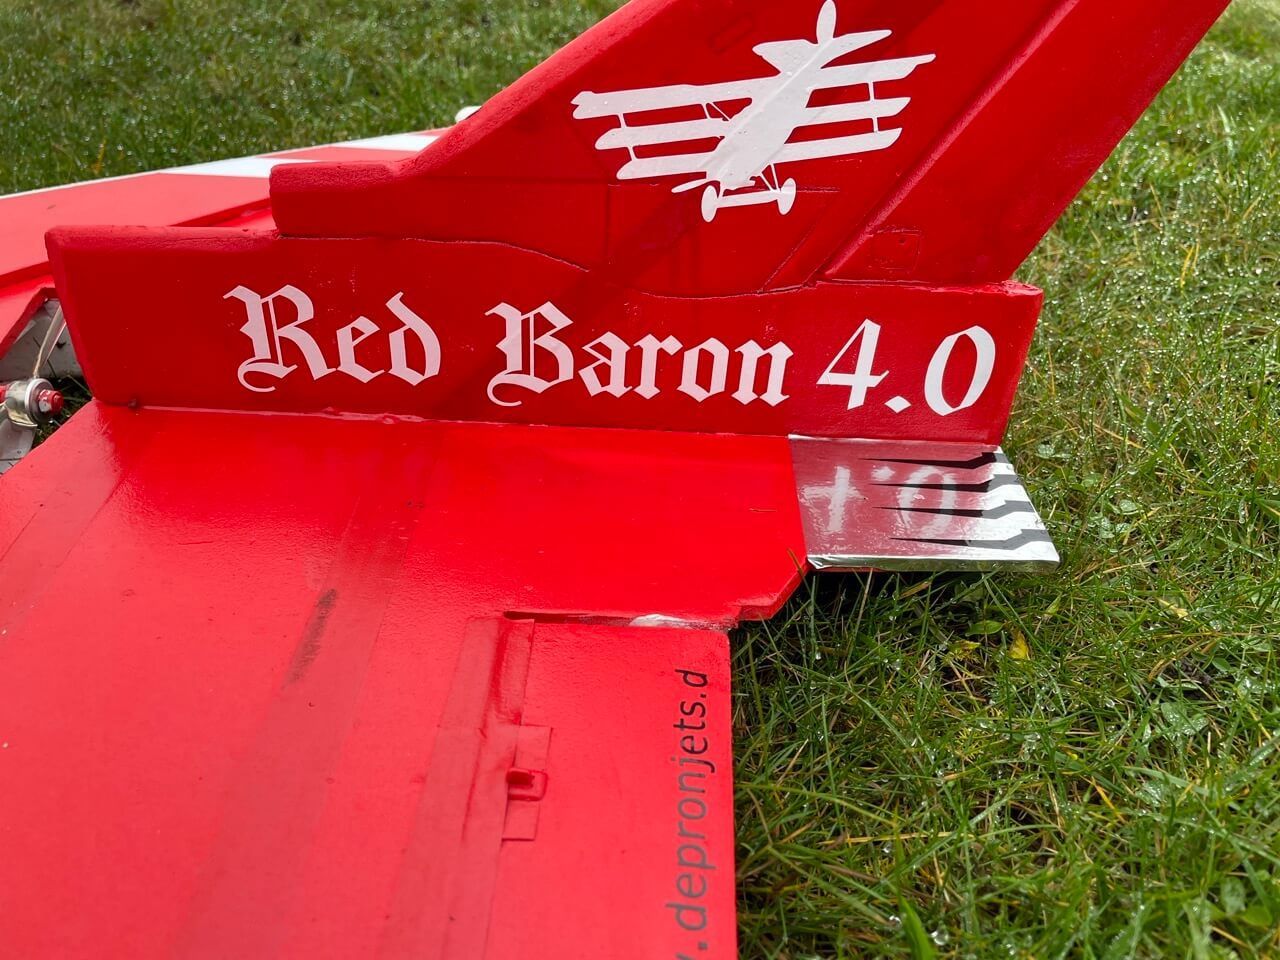 RC Red Baron 4.0 Eurofighter mit Decals am Heck